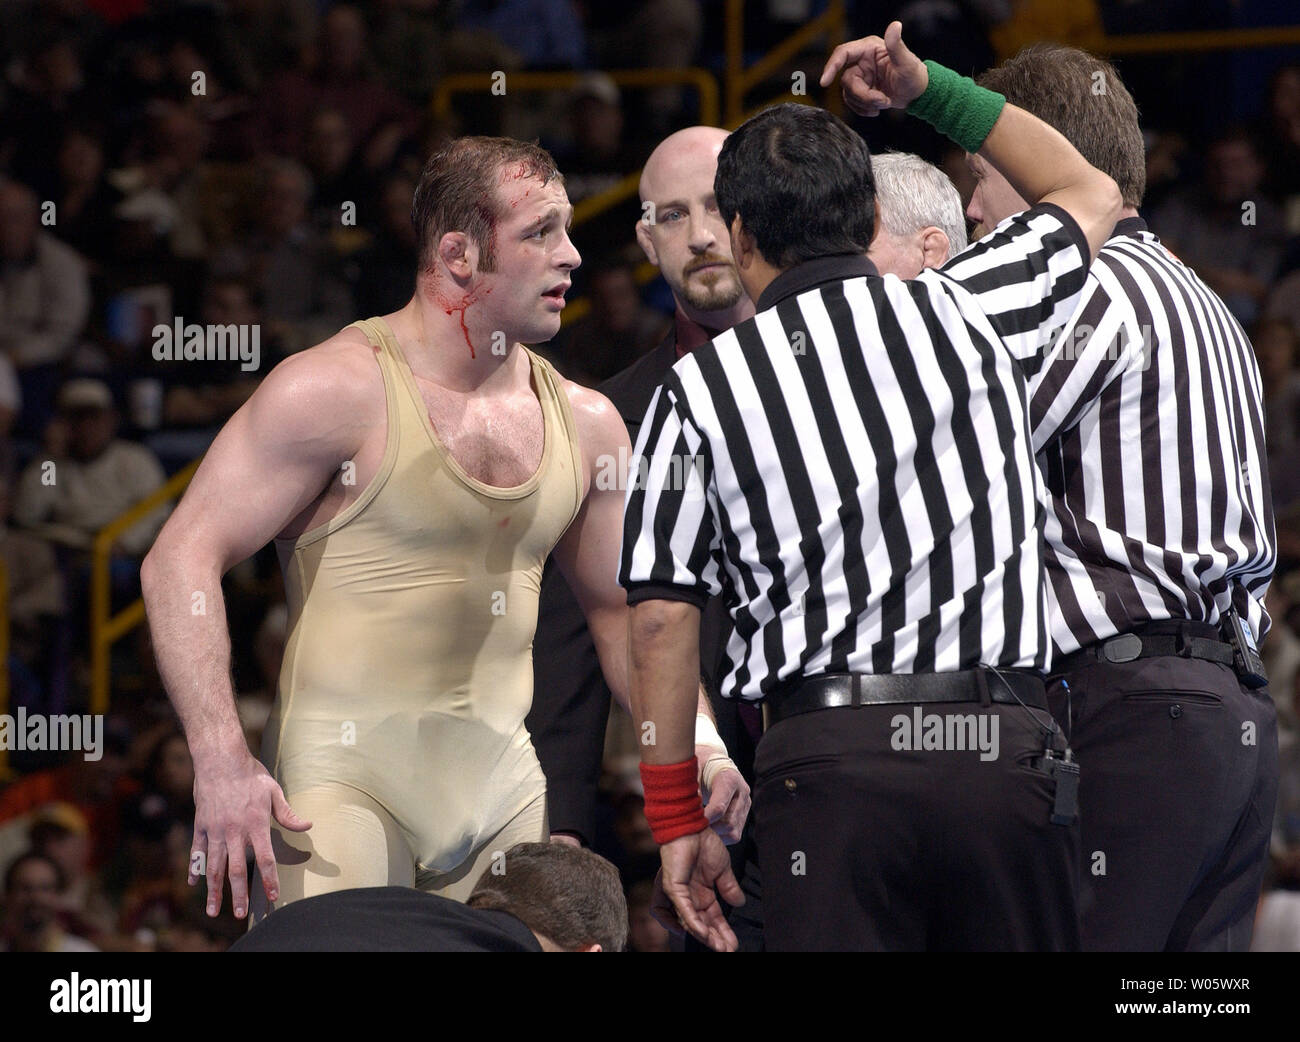 https://c8.alamy.com/comp/W05WXR/officials-stop-the-match-after-minnesotas-damion-hahn-bleeds-from-the-top-of-his-head-during-his-197-pound-match-with-ryan-fulsaas-of-iowa-in-the-ncaa-division-1-wrestling-championships-at-the-savvis-center-in-st-louis-on-mar5ch-20-2004-hahn-won-the-match-7-2upi-photobill-gutweiler-W05WXR.jpg